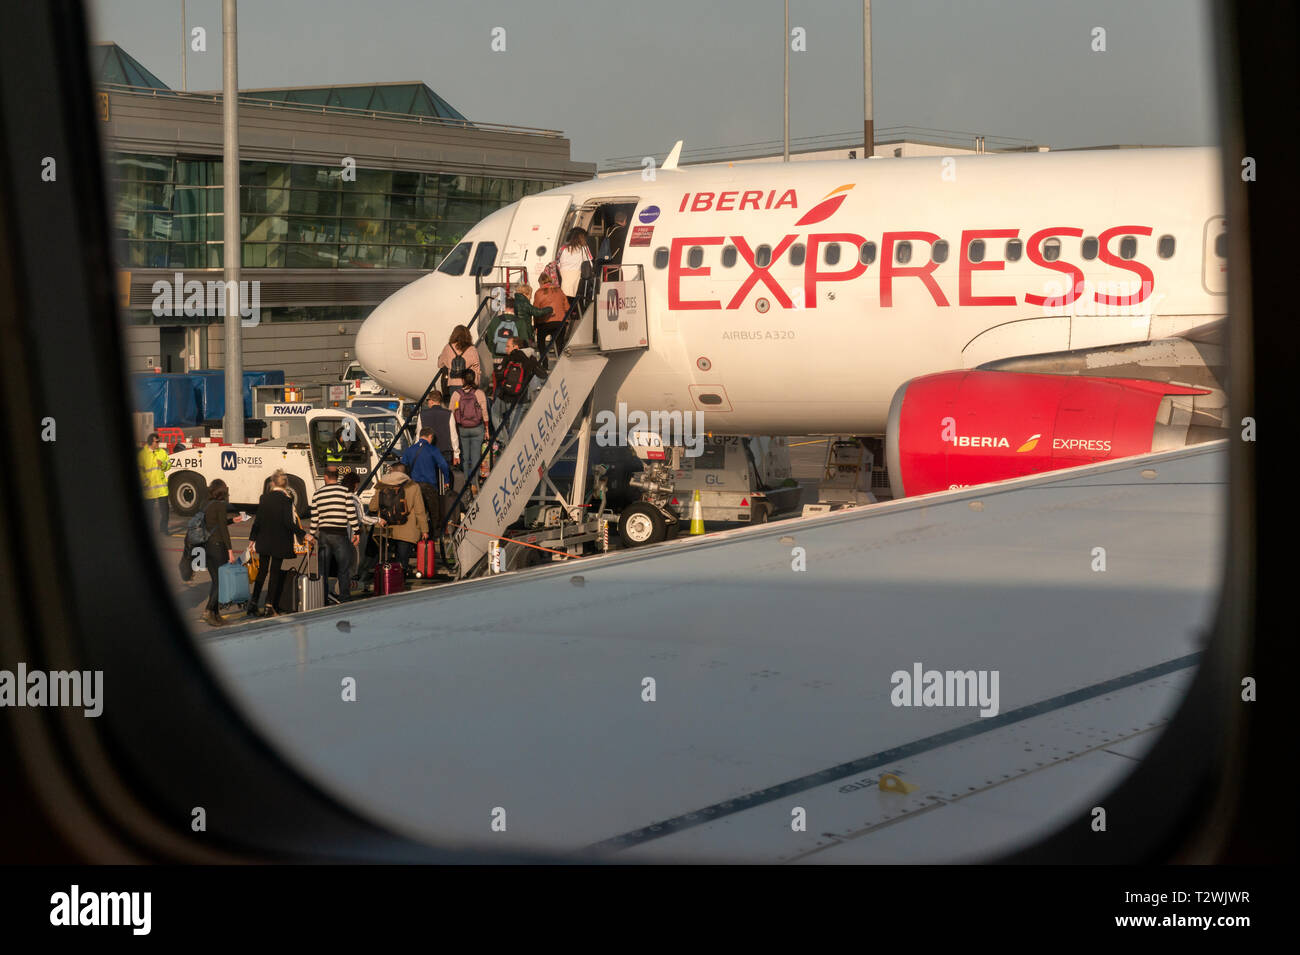 Iberia Express Airbus A320 jet plane at Dublin Airport and passengers people boarding commercial flight as seen through an airplane window Stock Photo